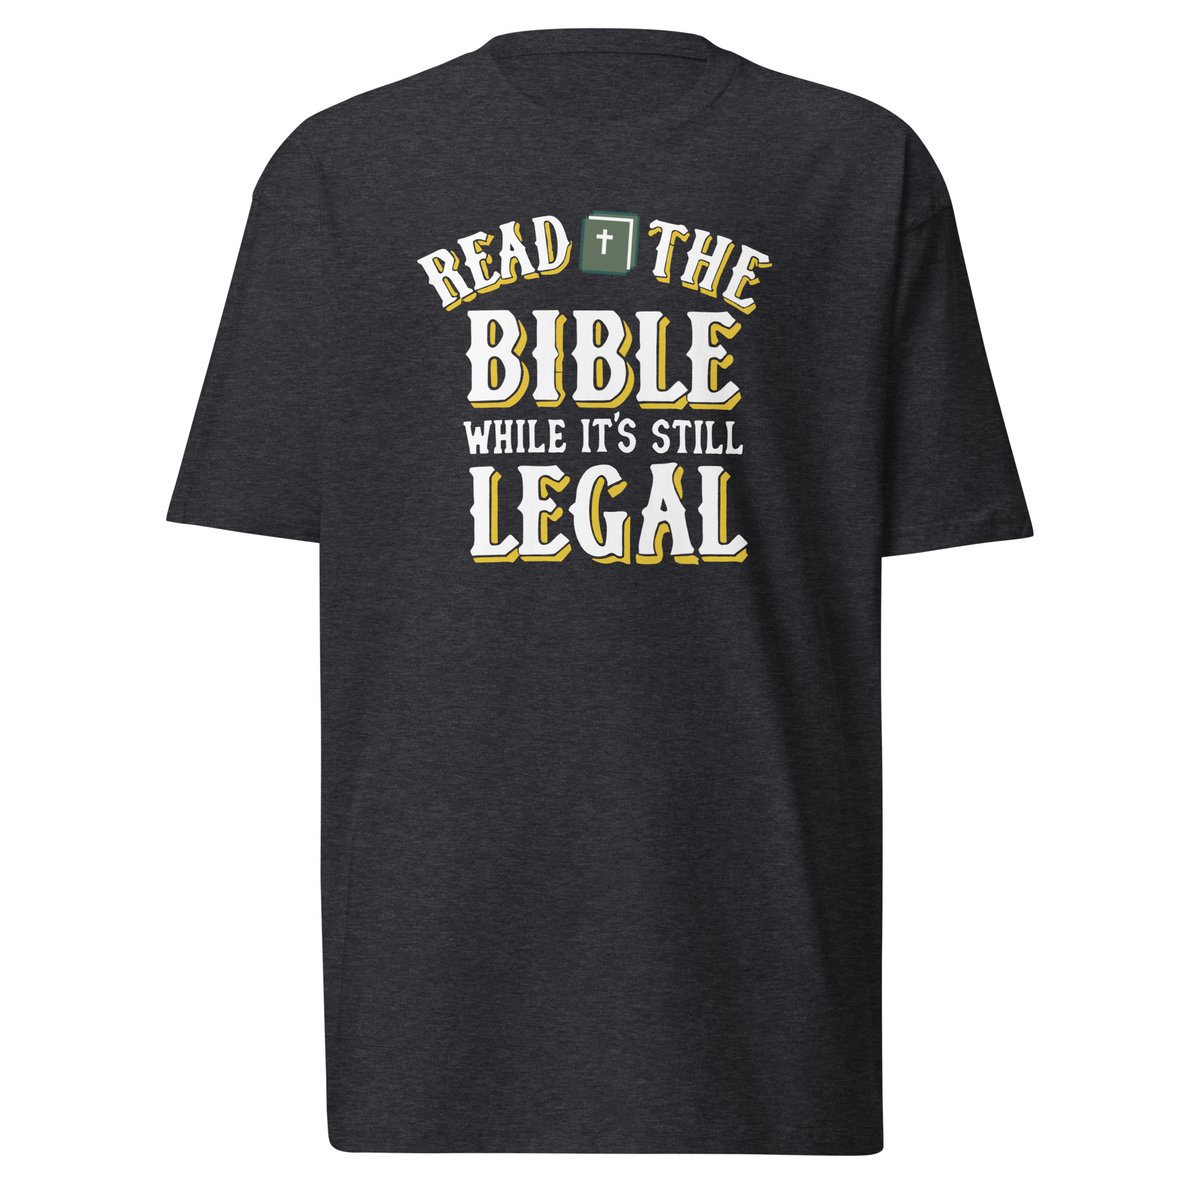 I got this t-shirt from the Gab store. I knew it would become relevant some time in the near future. Didn't think it would be this soon. I shall continue to read the Bible and quote verses from it. Shame on congress.
#FreeSpeech #FreedomofReligion